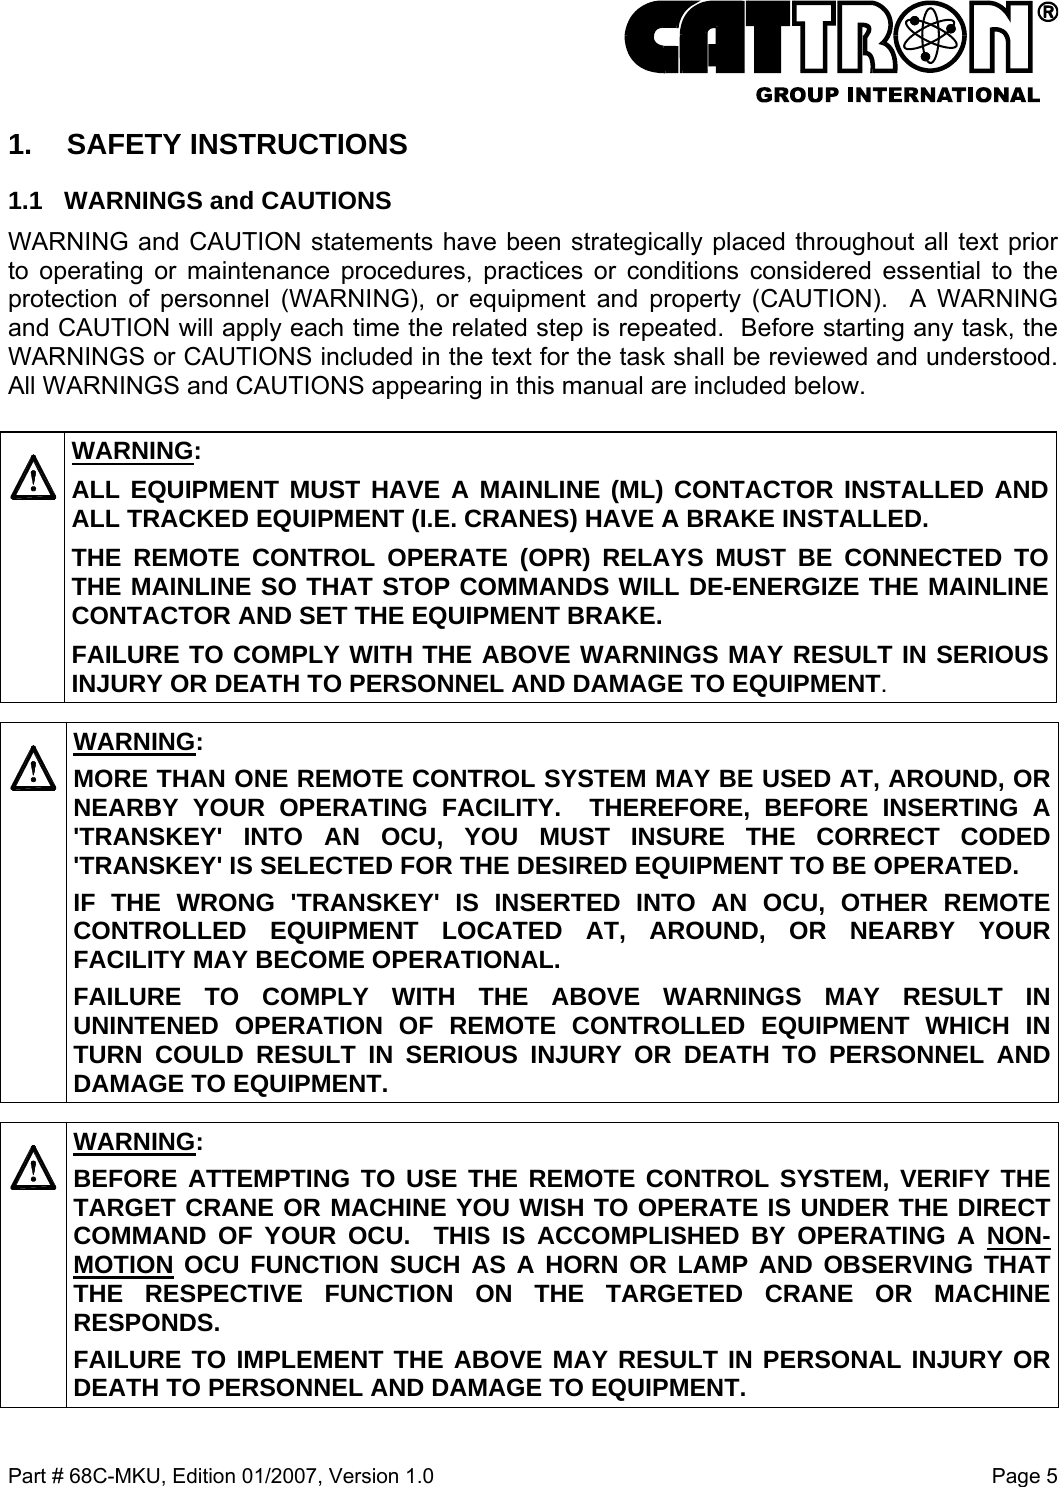  Part # 68C-MKU, Edition 01/2007, Version 1.0  Page 5   1. SAFETY INSTRUCTIONS 1.1  WARNINGS and CAUTIONS WARNING and CAUTION statements have been strategically placed throughout all text prior to operating or maintenance procedures, practices or conditions considered essential to the protection of personnel (WARNING), or equipment and property (CAUTION).  A WARNING and CAUTION will apply each time the related step is repeated.  Before starting any task, the WARNINGS or CAUTIONS included in the text for the task shall be reviewed and understood.  All WARNINGS and CAUTIONS appearing in this manual are included below.    WARNING: ALL EQUIPMENT MUST HAVE A MAINLINE (ML) CONTACTOR INSTALLED AND ALL TRACKED EQUIPMENT (I.E. CRANES) HAVE A BRAKE INSTALLED. THE REMOTE CONTROL OPERATE (OPR) RELAYS MUST BE CONNECTED TO THE MAINLINE SO THAT STOP COMMANDS WILL DE-ENERGIZE THE MAINLINE CONTACTOR AND SET THE EQUIPMENT BRAKE.  FAILURE TO COMPLY WITH THE ABOVE WARNINGS MAY RESULT IN SERIOUS INJURY OR DEATH TO PERSONNEL AND DAMAGE TO EQUIPMENT.    WARNING: MORE THAN ONE REMOTE CONTROL SYSTEM MAY BE USED AT, AROUND, OR NEARBY YOUR OPERATING FACILITY.  THEREFORE, BEFORE INSERTING A &apos;TRANSKEY&apos; INTO AN OCU, YOU MUST INSURE THE CORRECT CODED &apos;TRANSKEY&apos; IS SELECTED FOR THE DESIRED EQUIPMENT TO BE OPERATED. IF THE WRONG &apos;TRANSKEY&apos; IS INSERTED INTO AN OCU, OTHER REMOTE CONTROLLED EQUIPMENT LOCATED AT, AROUND, OR NEARBY YOUR FACILITY MAY BECOME OPERATIONAL. FAILURE TO COMPLY WITH THE ABOVE WARNINGS MAY RESULT IN UNINTENED OPERATION OF REMOTE CONTROLLED EQUIPMENT WHICH IN TURN COULD RESULT IN SERIOUS INJURY OR DEATH TO PERSONNEL AND DAMAGE TO EQUIPMENT.    WARNING: BEFORE ATTEMPTING TO USE THE REMOTE CONTROL SYSTEM, VERIFY THE TARGET CRANE OR MACHINE YOU WISH TO OPERATE IS UNDER THE DIRECT COMMAND OF YOUR OCU.  THIS IS ACCOMPLISHED BY OPERATING A NON-MOTION OCU FUNCTION SUCH AS A HORN OR LAMP AND OBSERVING THAT THE RESPECTIVE FUNCTION ON THE TARGETED CRANE OR MACHINE RESPONDS. FAILURE TO IMPLEMENT THE ABOVE MAY RESULT IN PERSONAL INJURY OR DEATH TO PERSONNEL AND DAMAGE TO EQUIPMENT.  